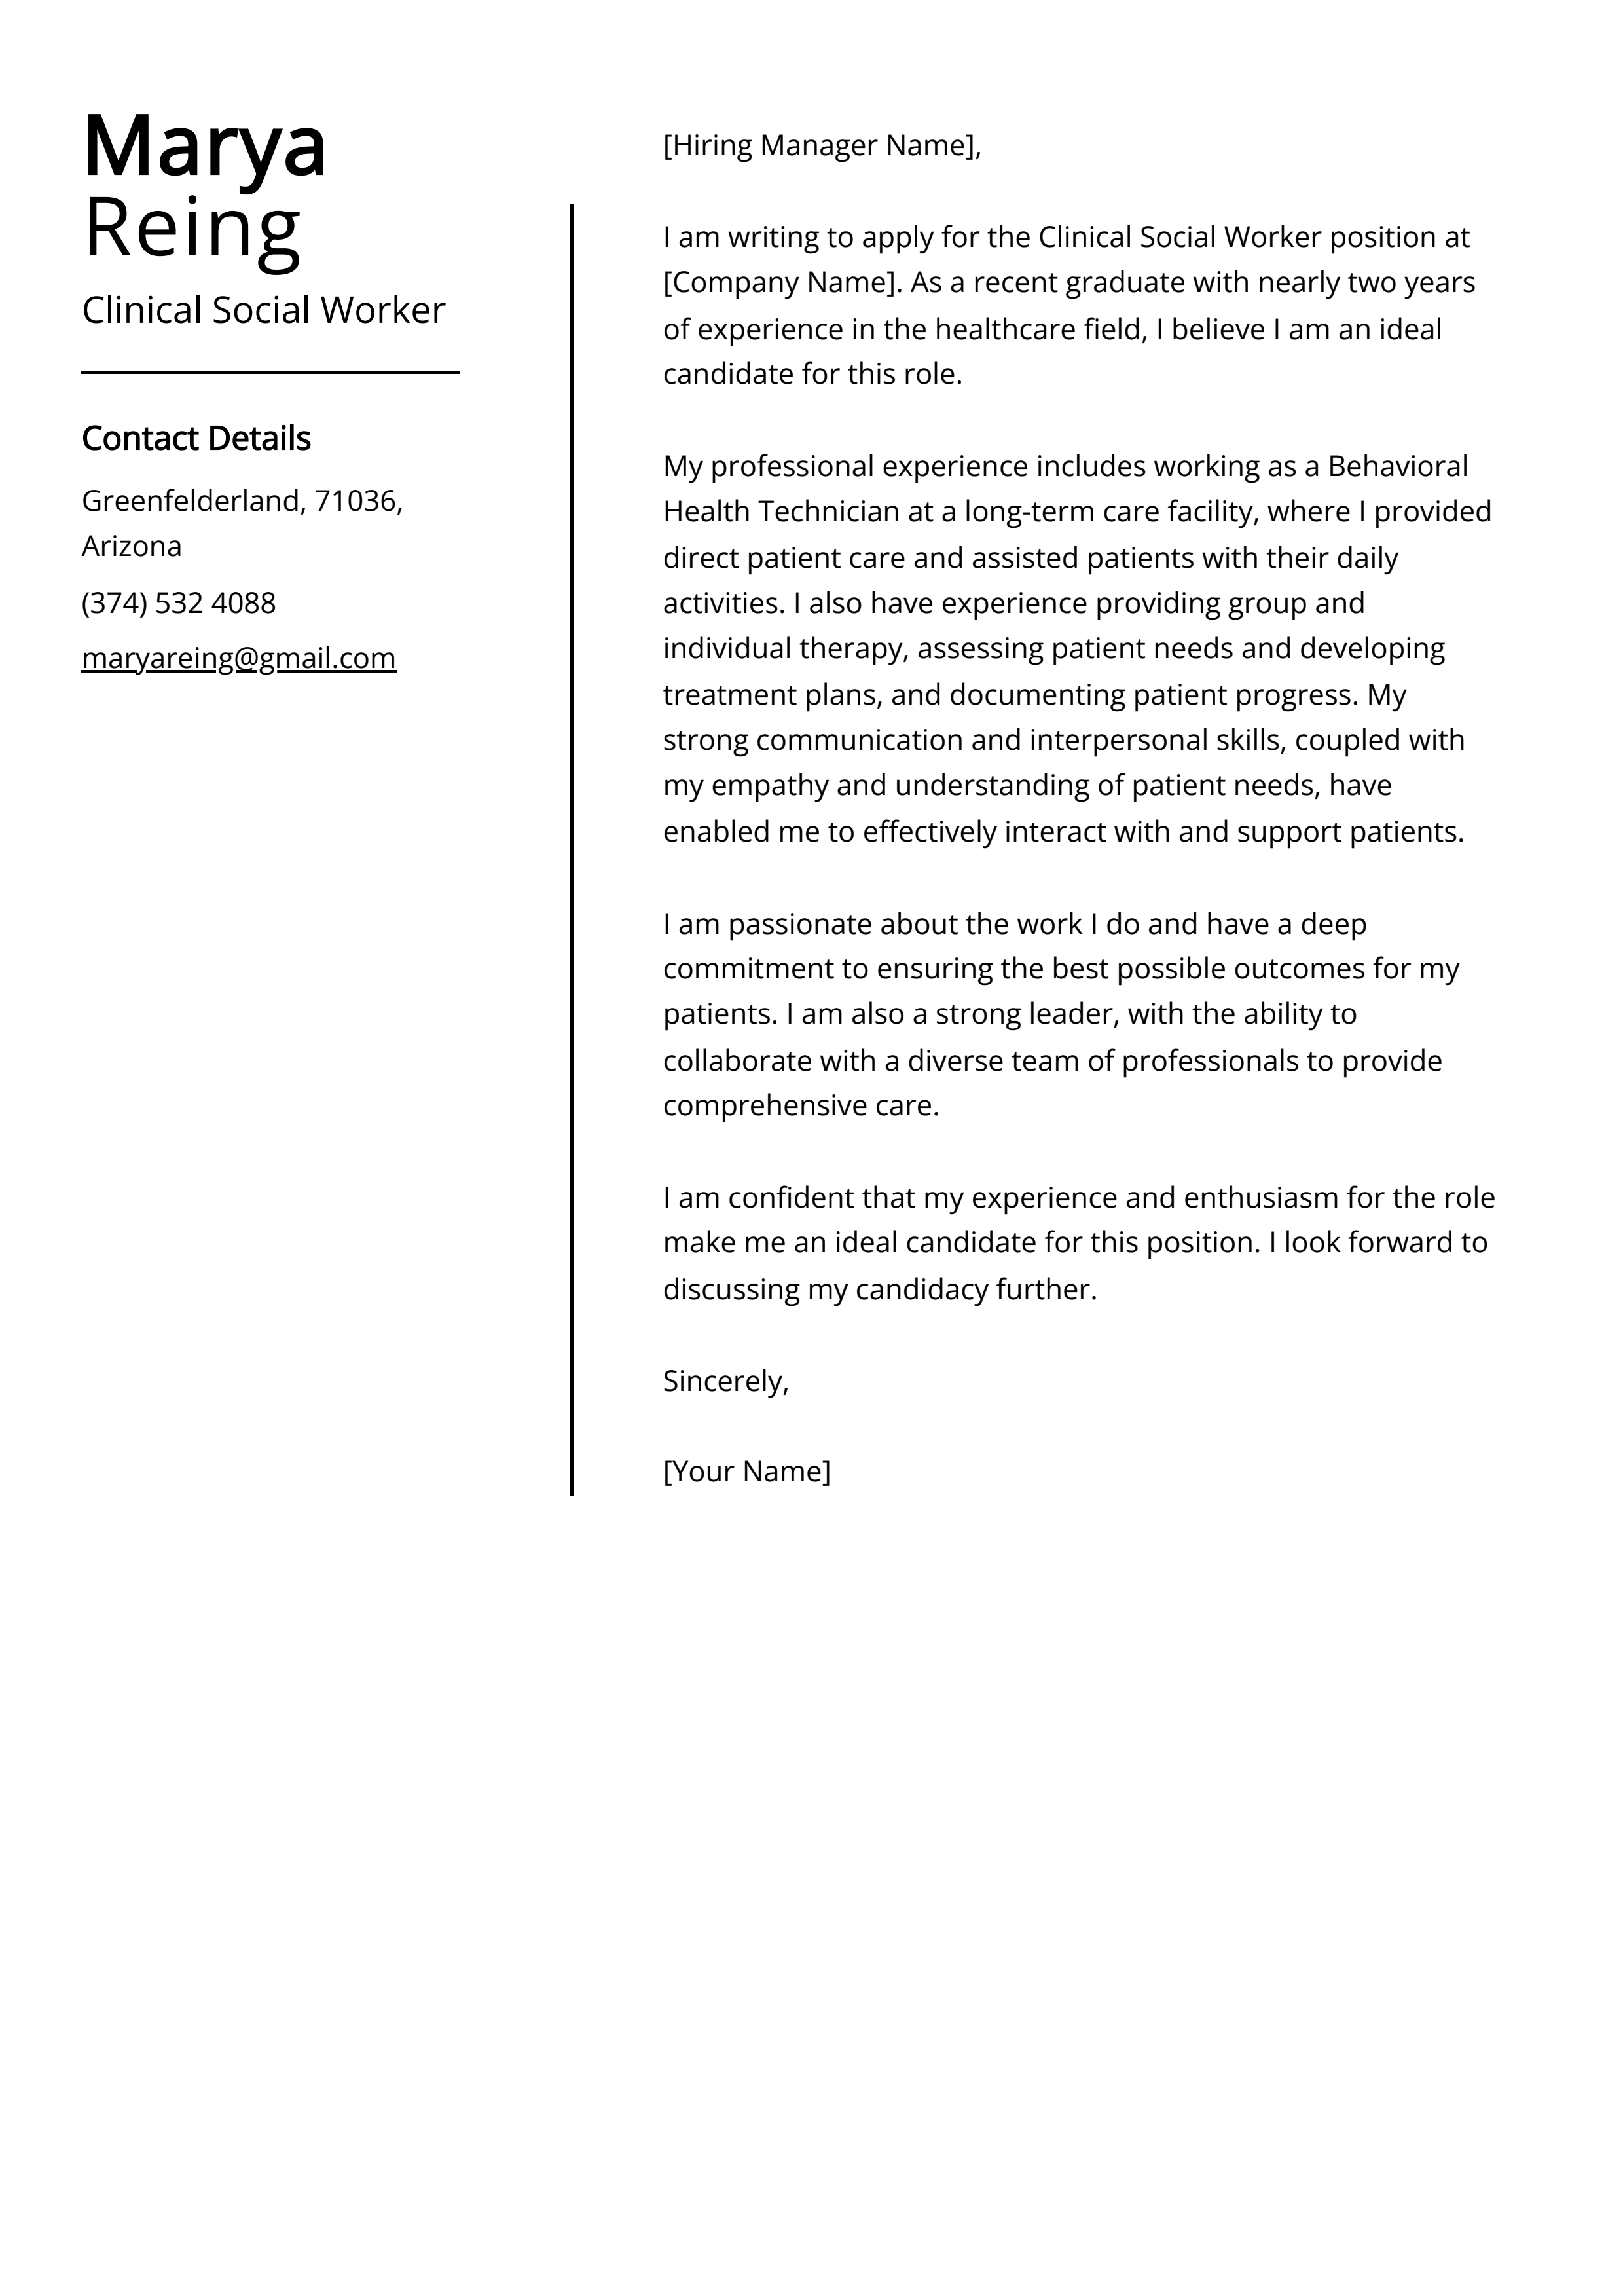 Clinical Social Worker Cover Letter Example